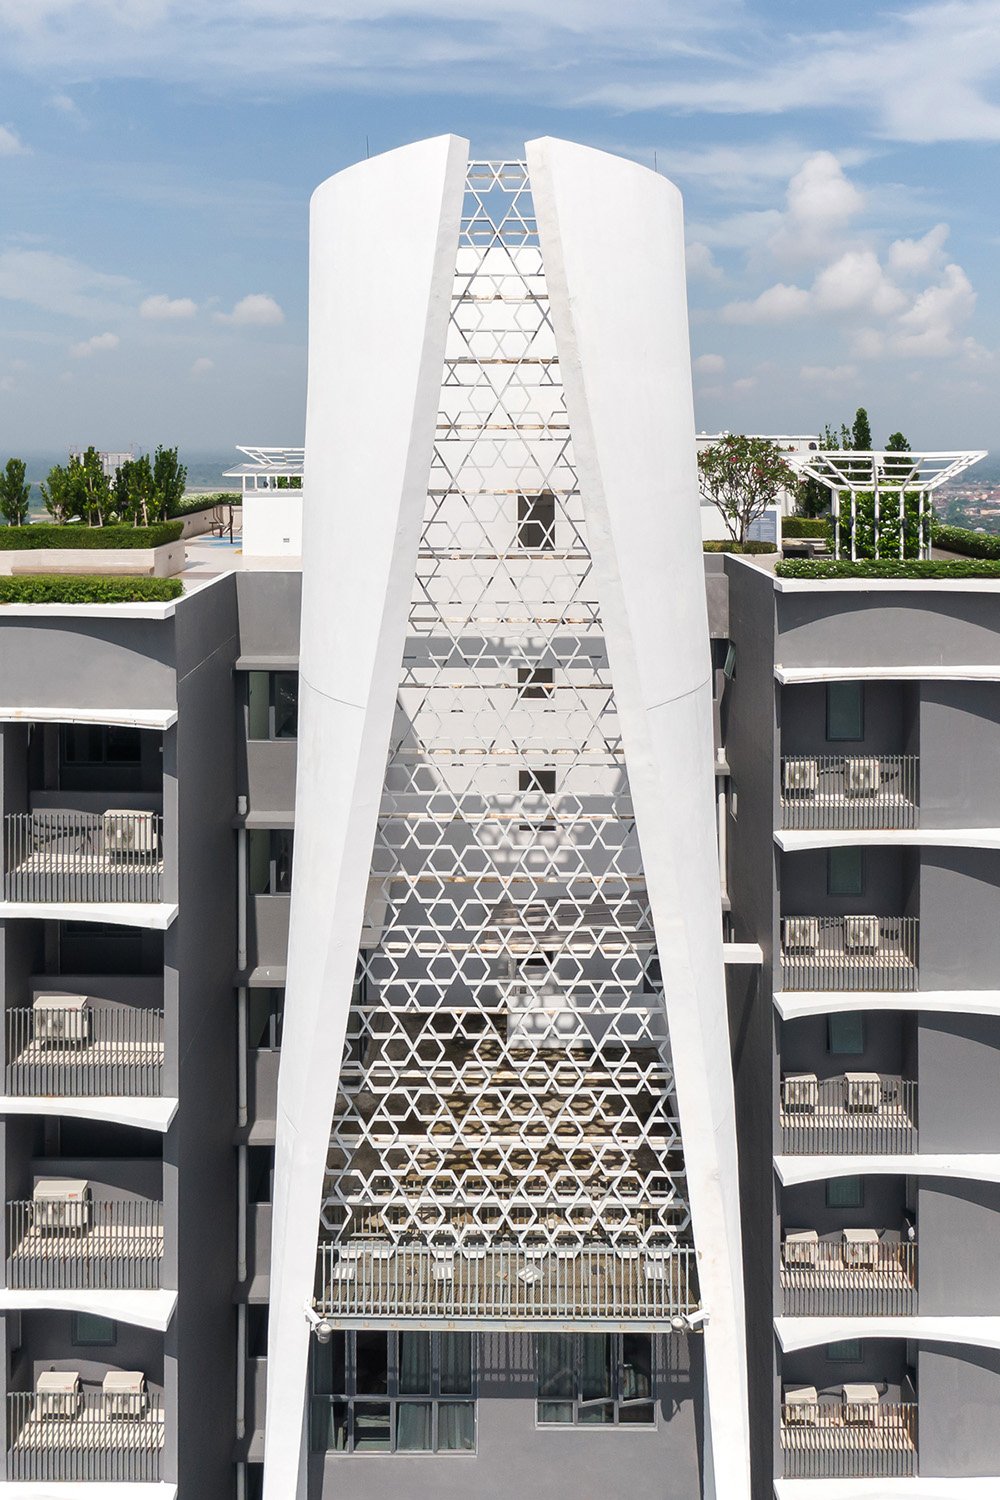 Aerial view of the three-dimensional arch crowning the building inspired by Du’a, a gesture of praying hands, reflecting an Islamic praying expression. | David Yeow